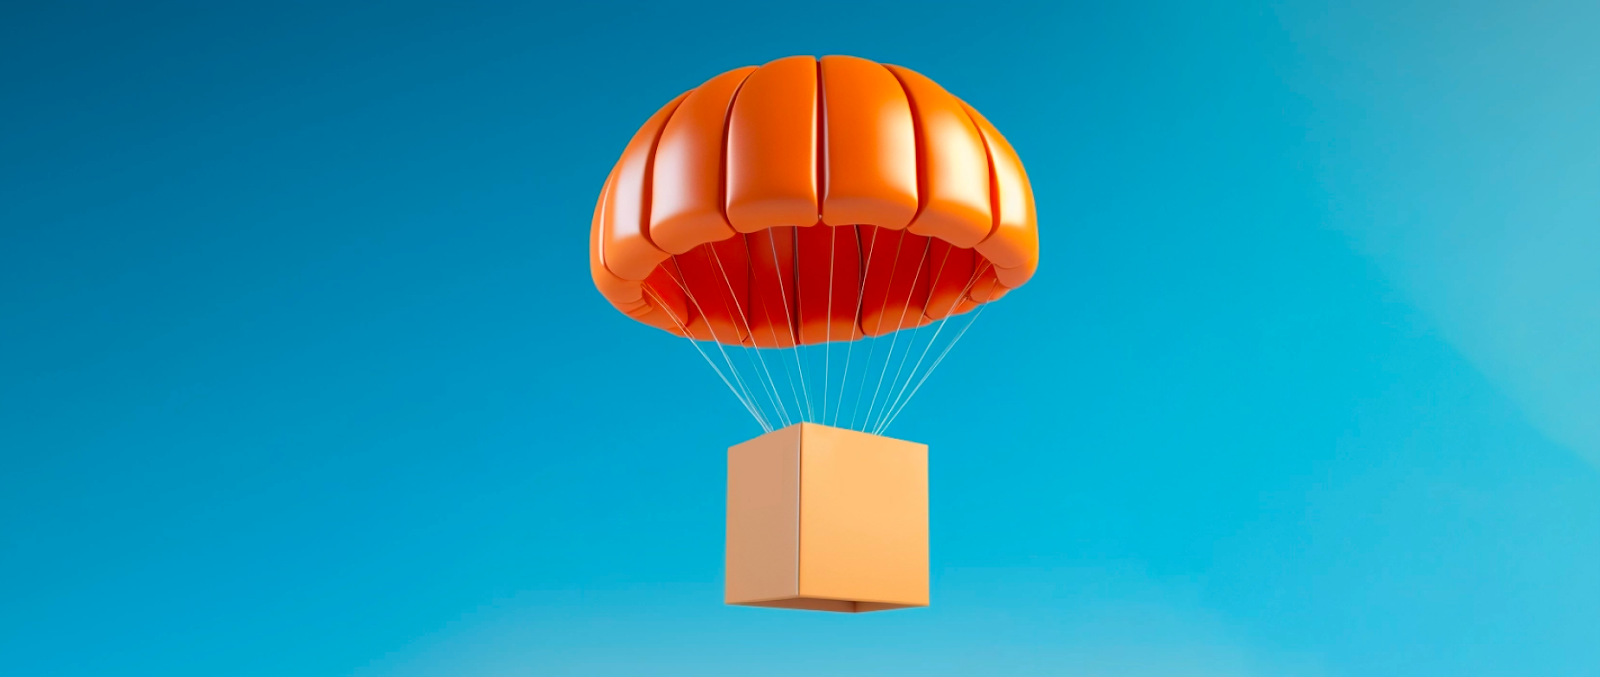 Amazon package attached to a parachute, representing the concept of Amazon dropshipping.